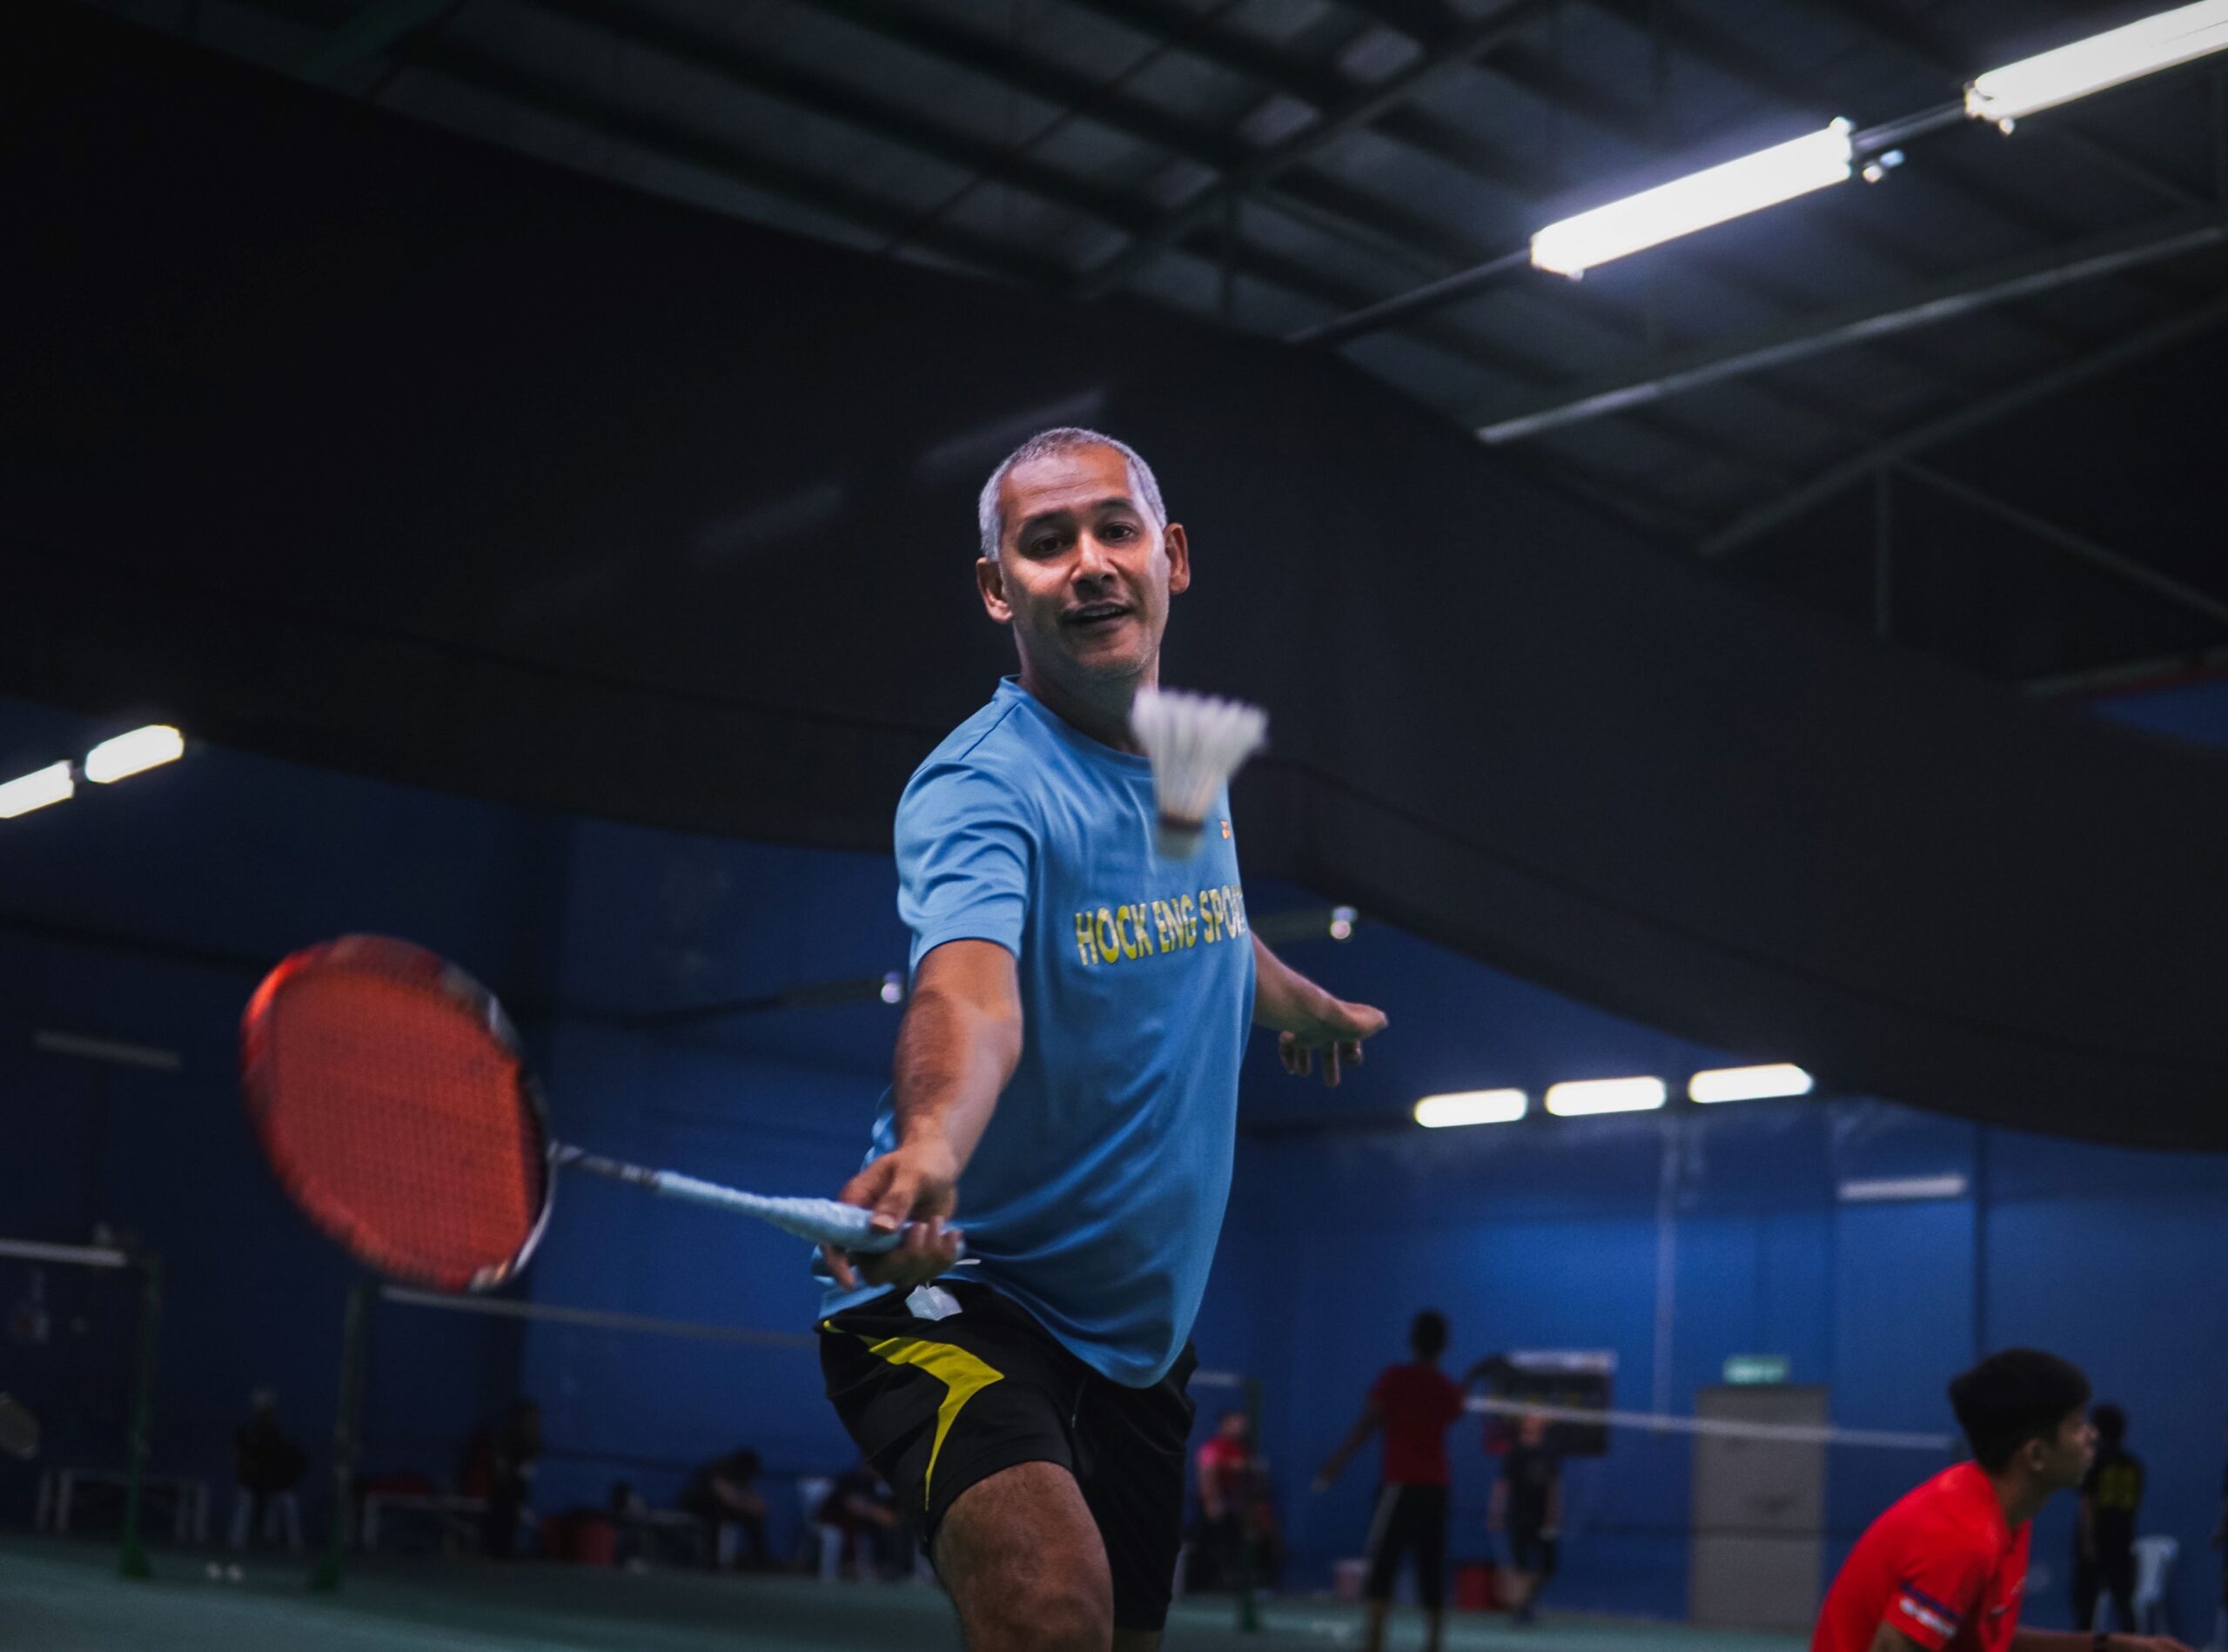 Person playing badminton in Vancouver, Canada.